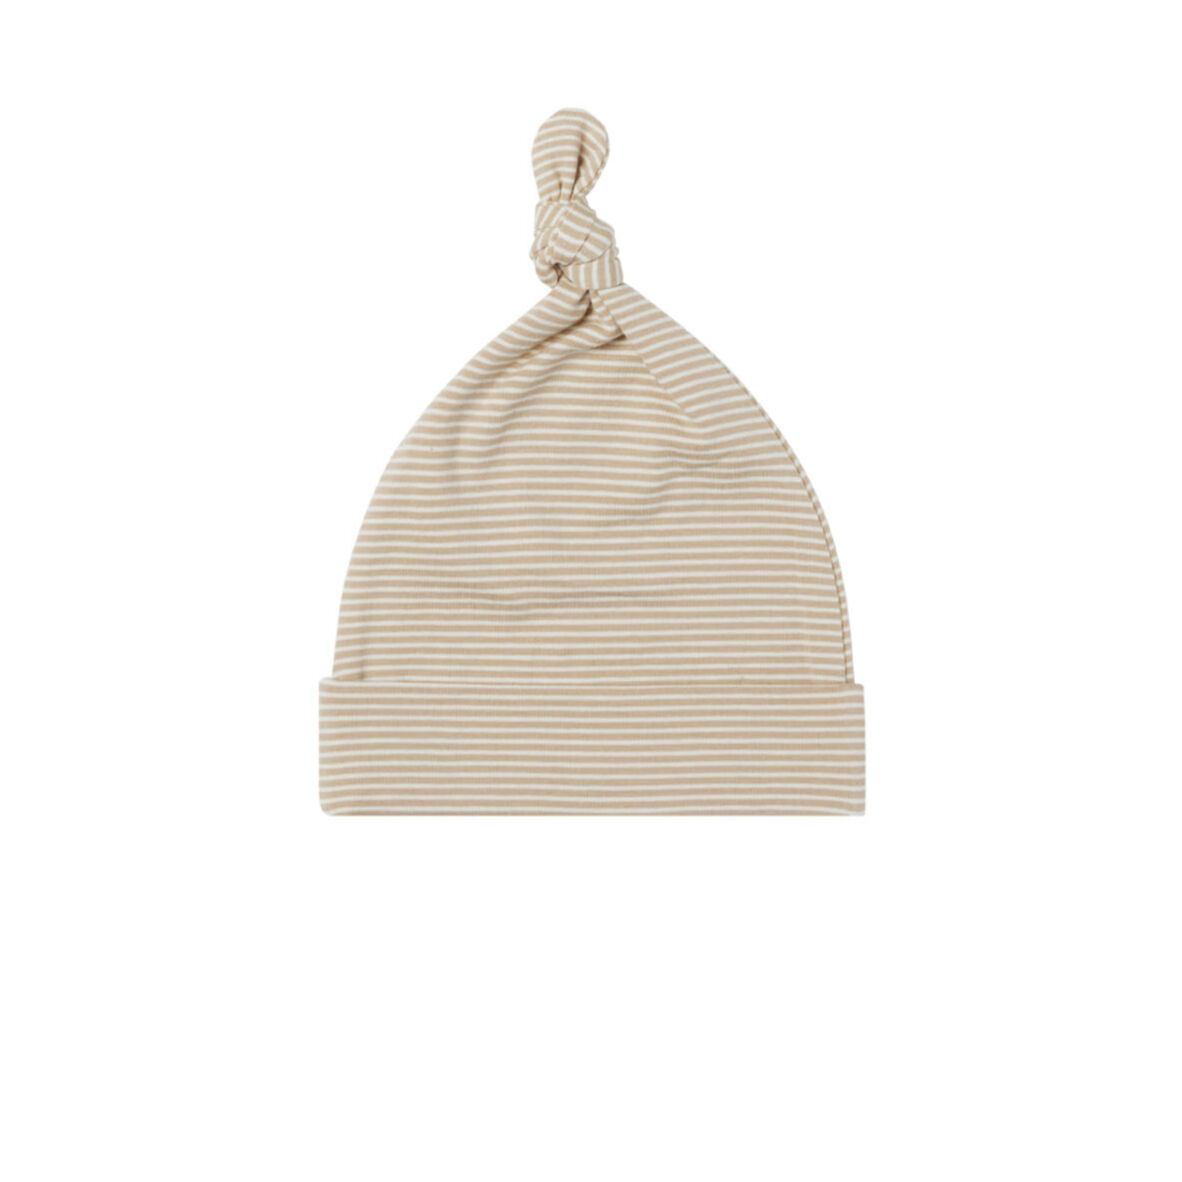 QUINCY MAE] KNOTTED BABY HAT || LATTE MICRO S...